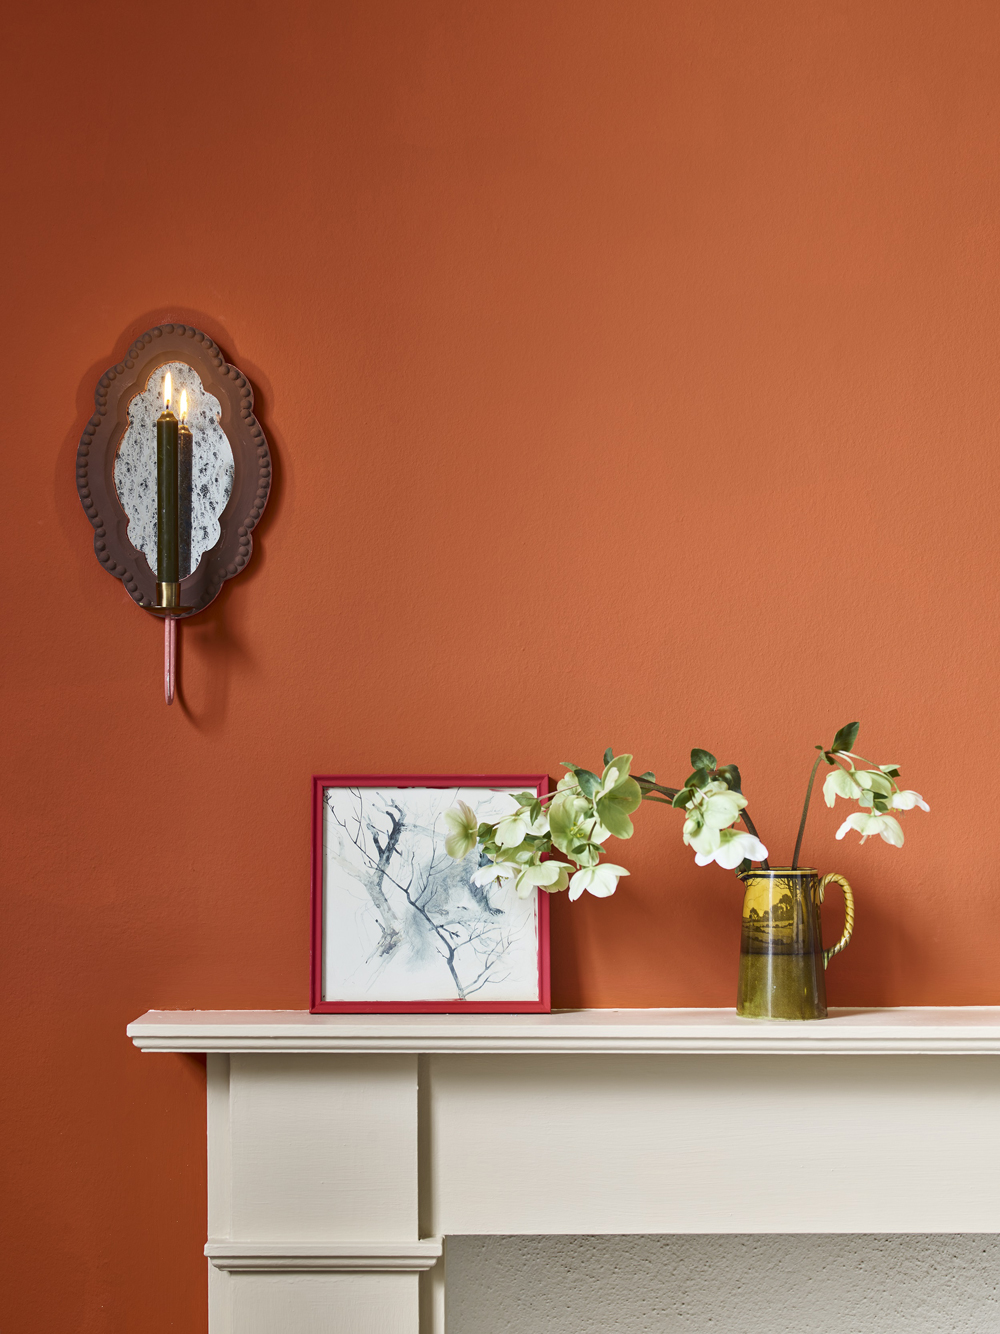 Close Up Riad Terracotta Wall Paint and Canvas Satin Paint Fireplace featuring Vase, Illustration and Candle Accessories